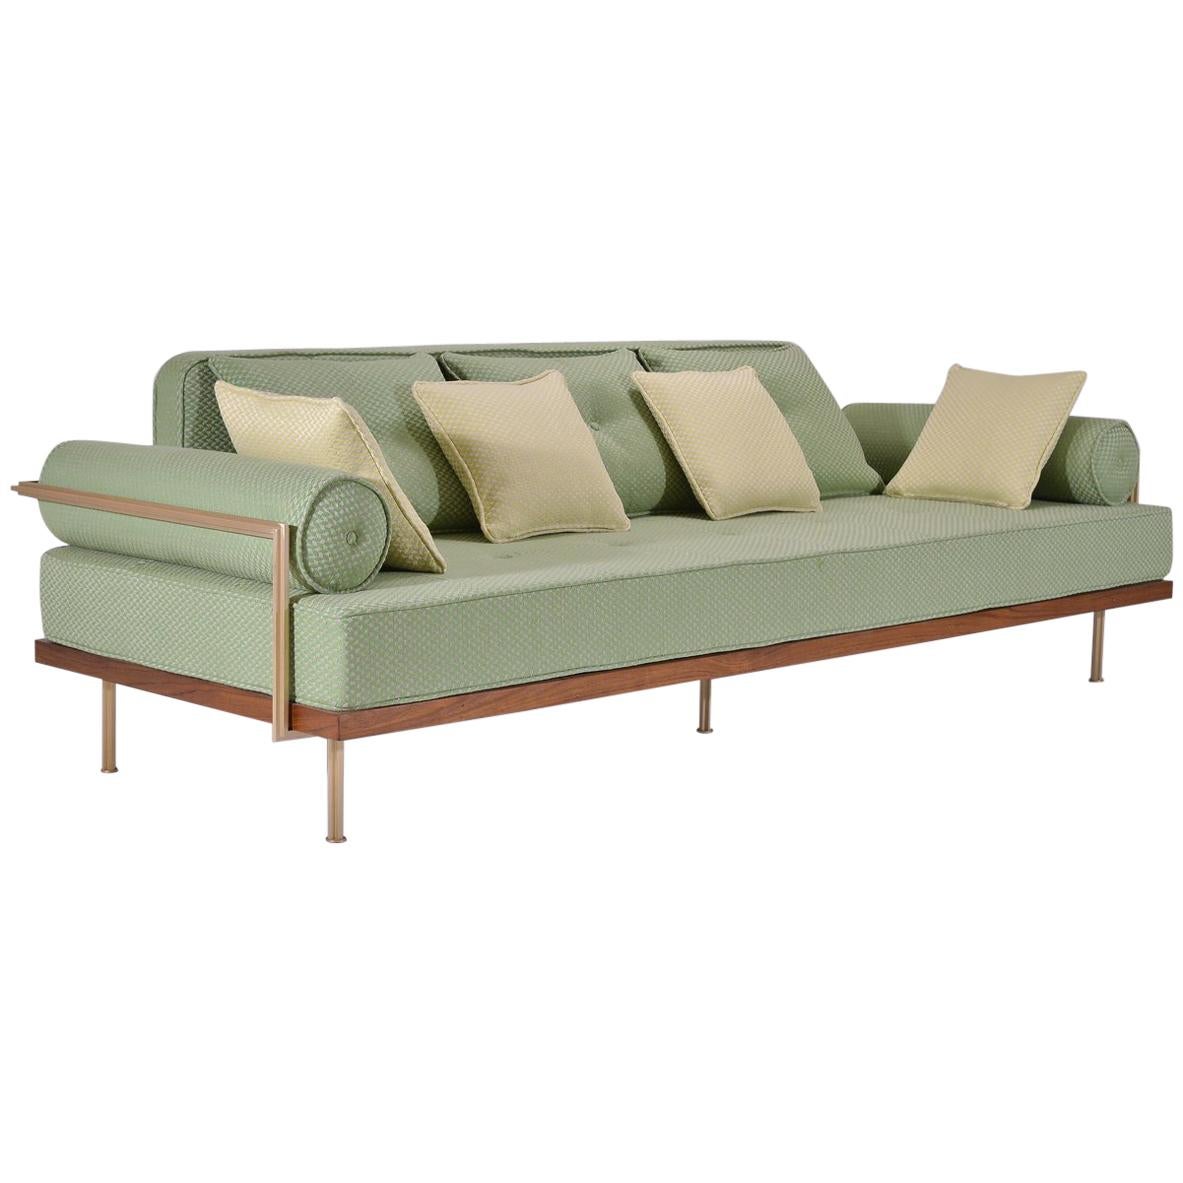 Bespoke Sofa with Brass and Reclaimed Hardwood Frame, by P. Tendercool 